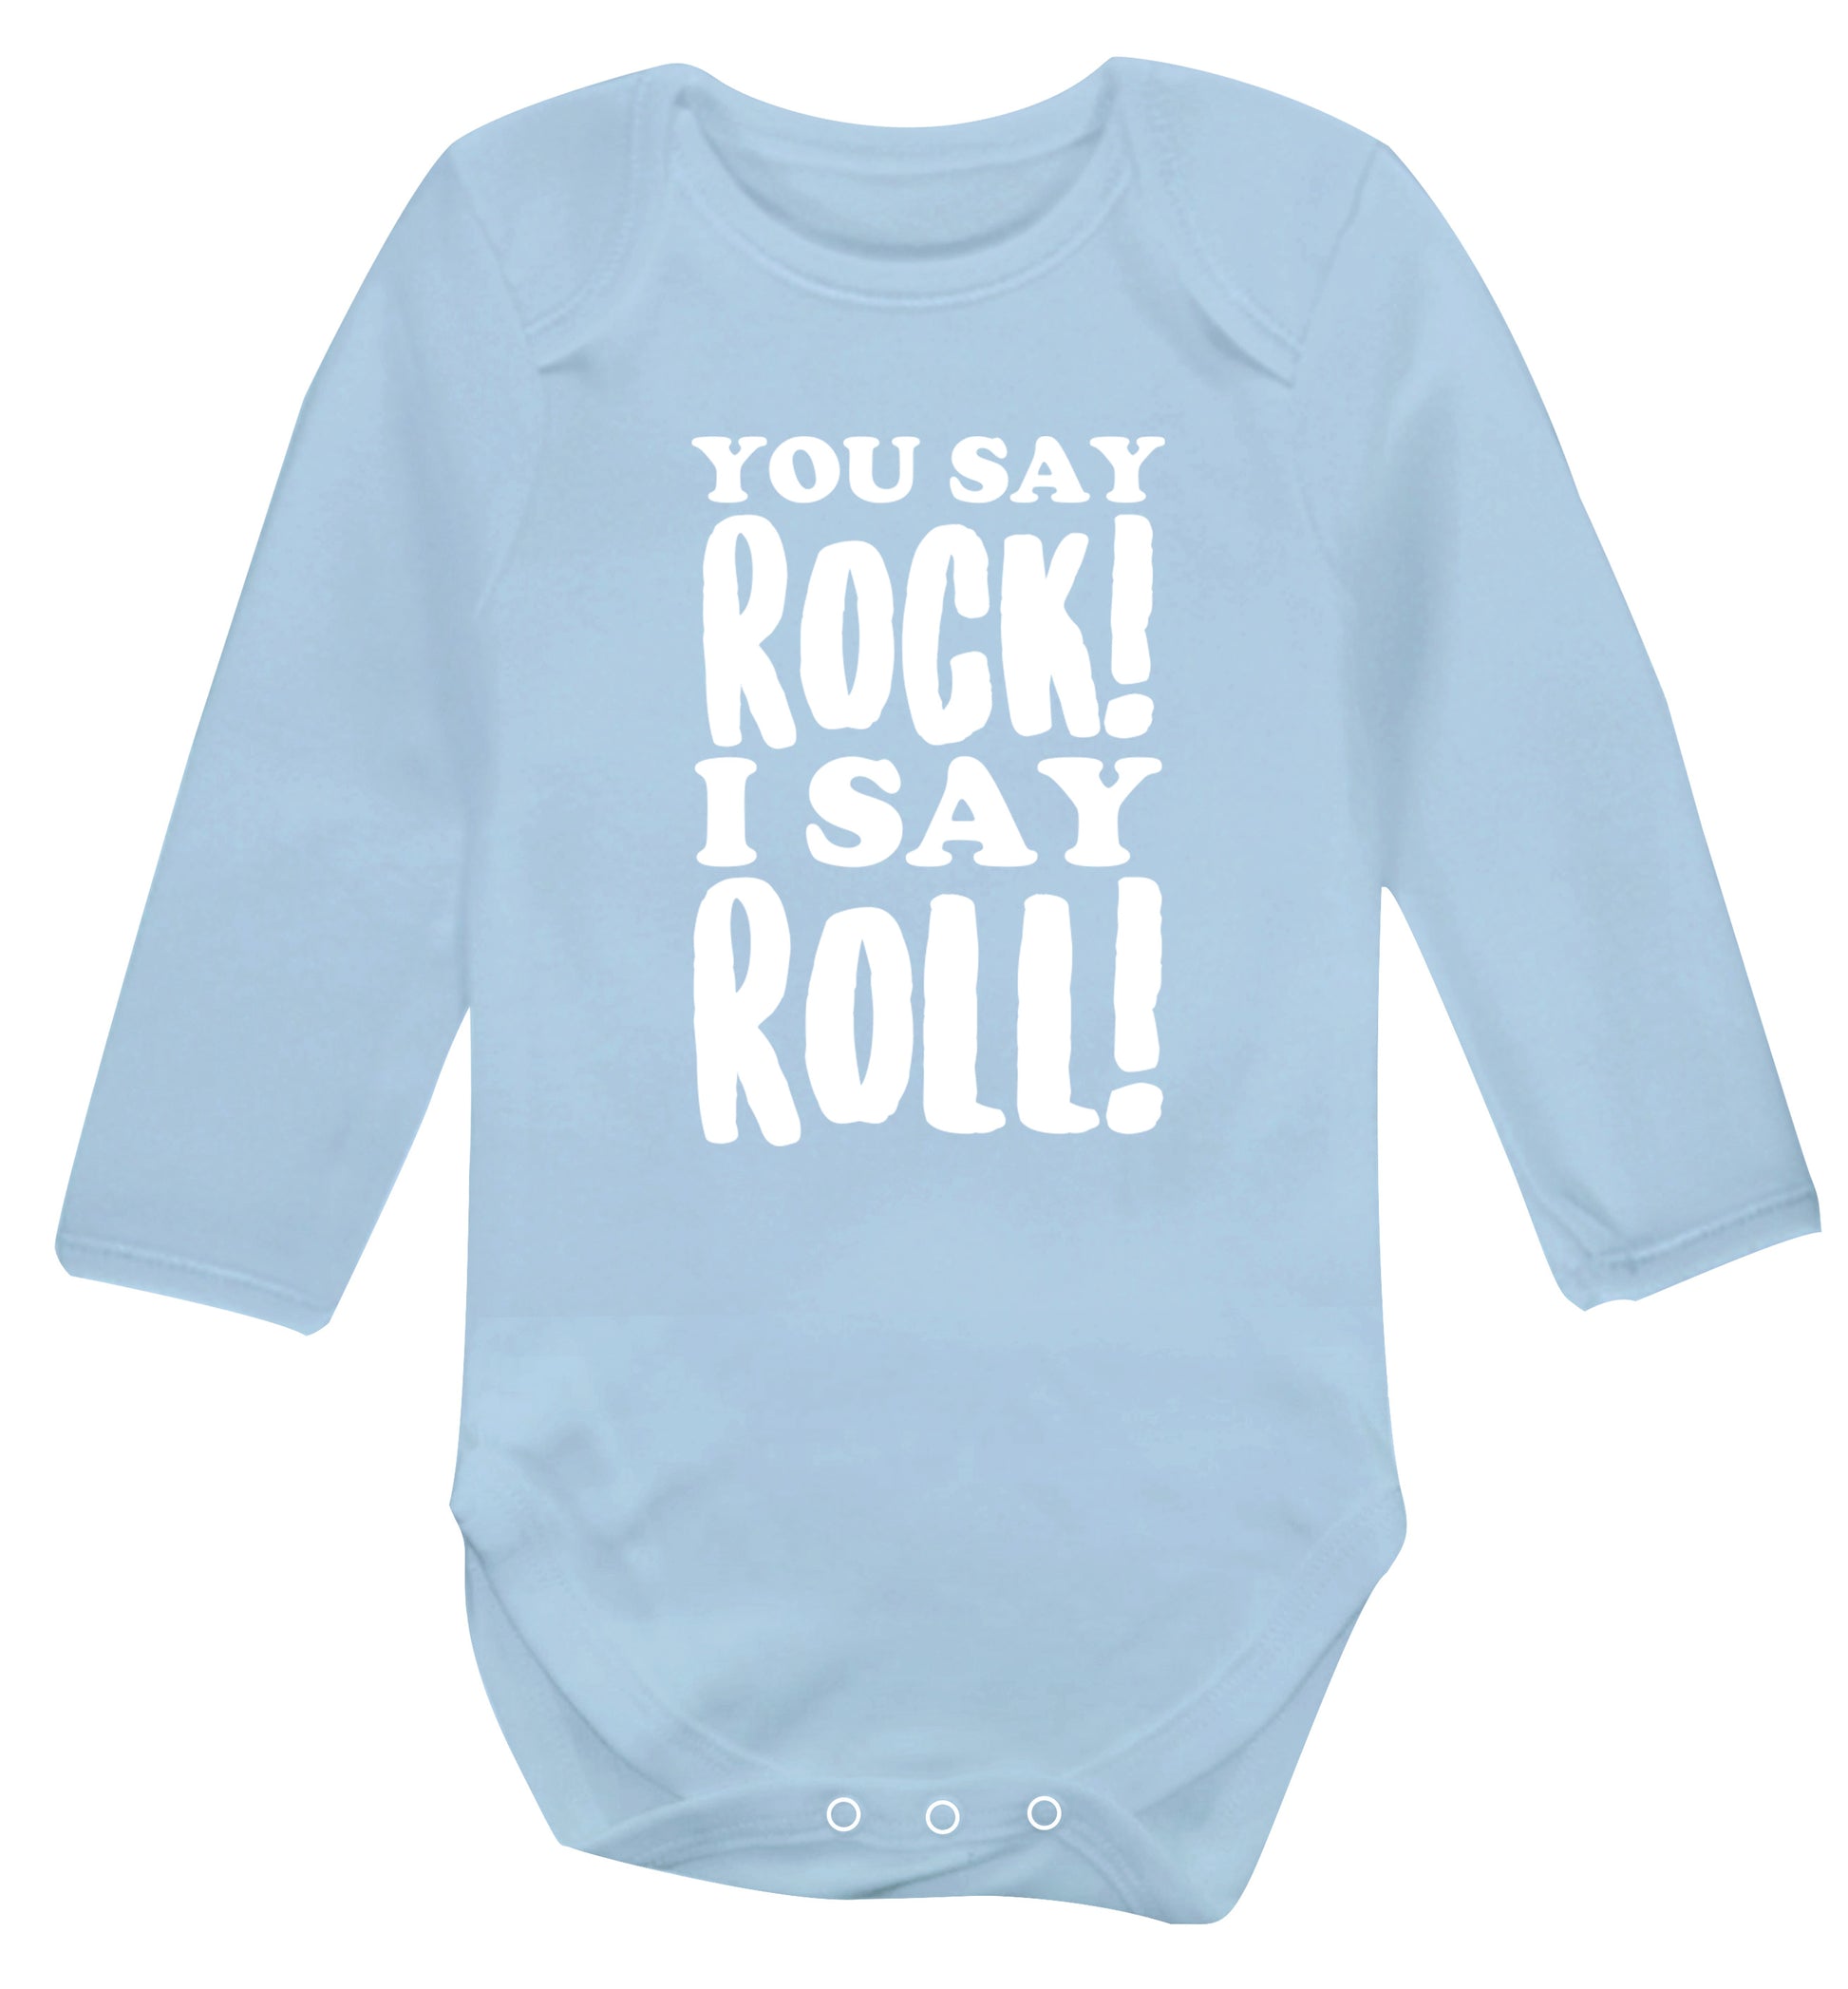 You say rock I say roll! Baby Vest long sleeved pale blue 6-12 months